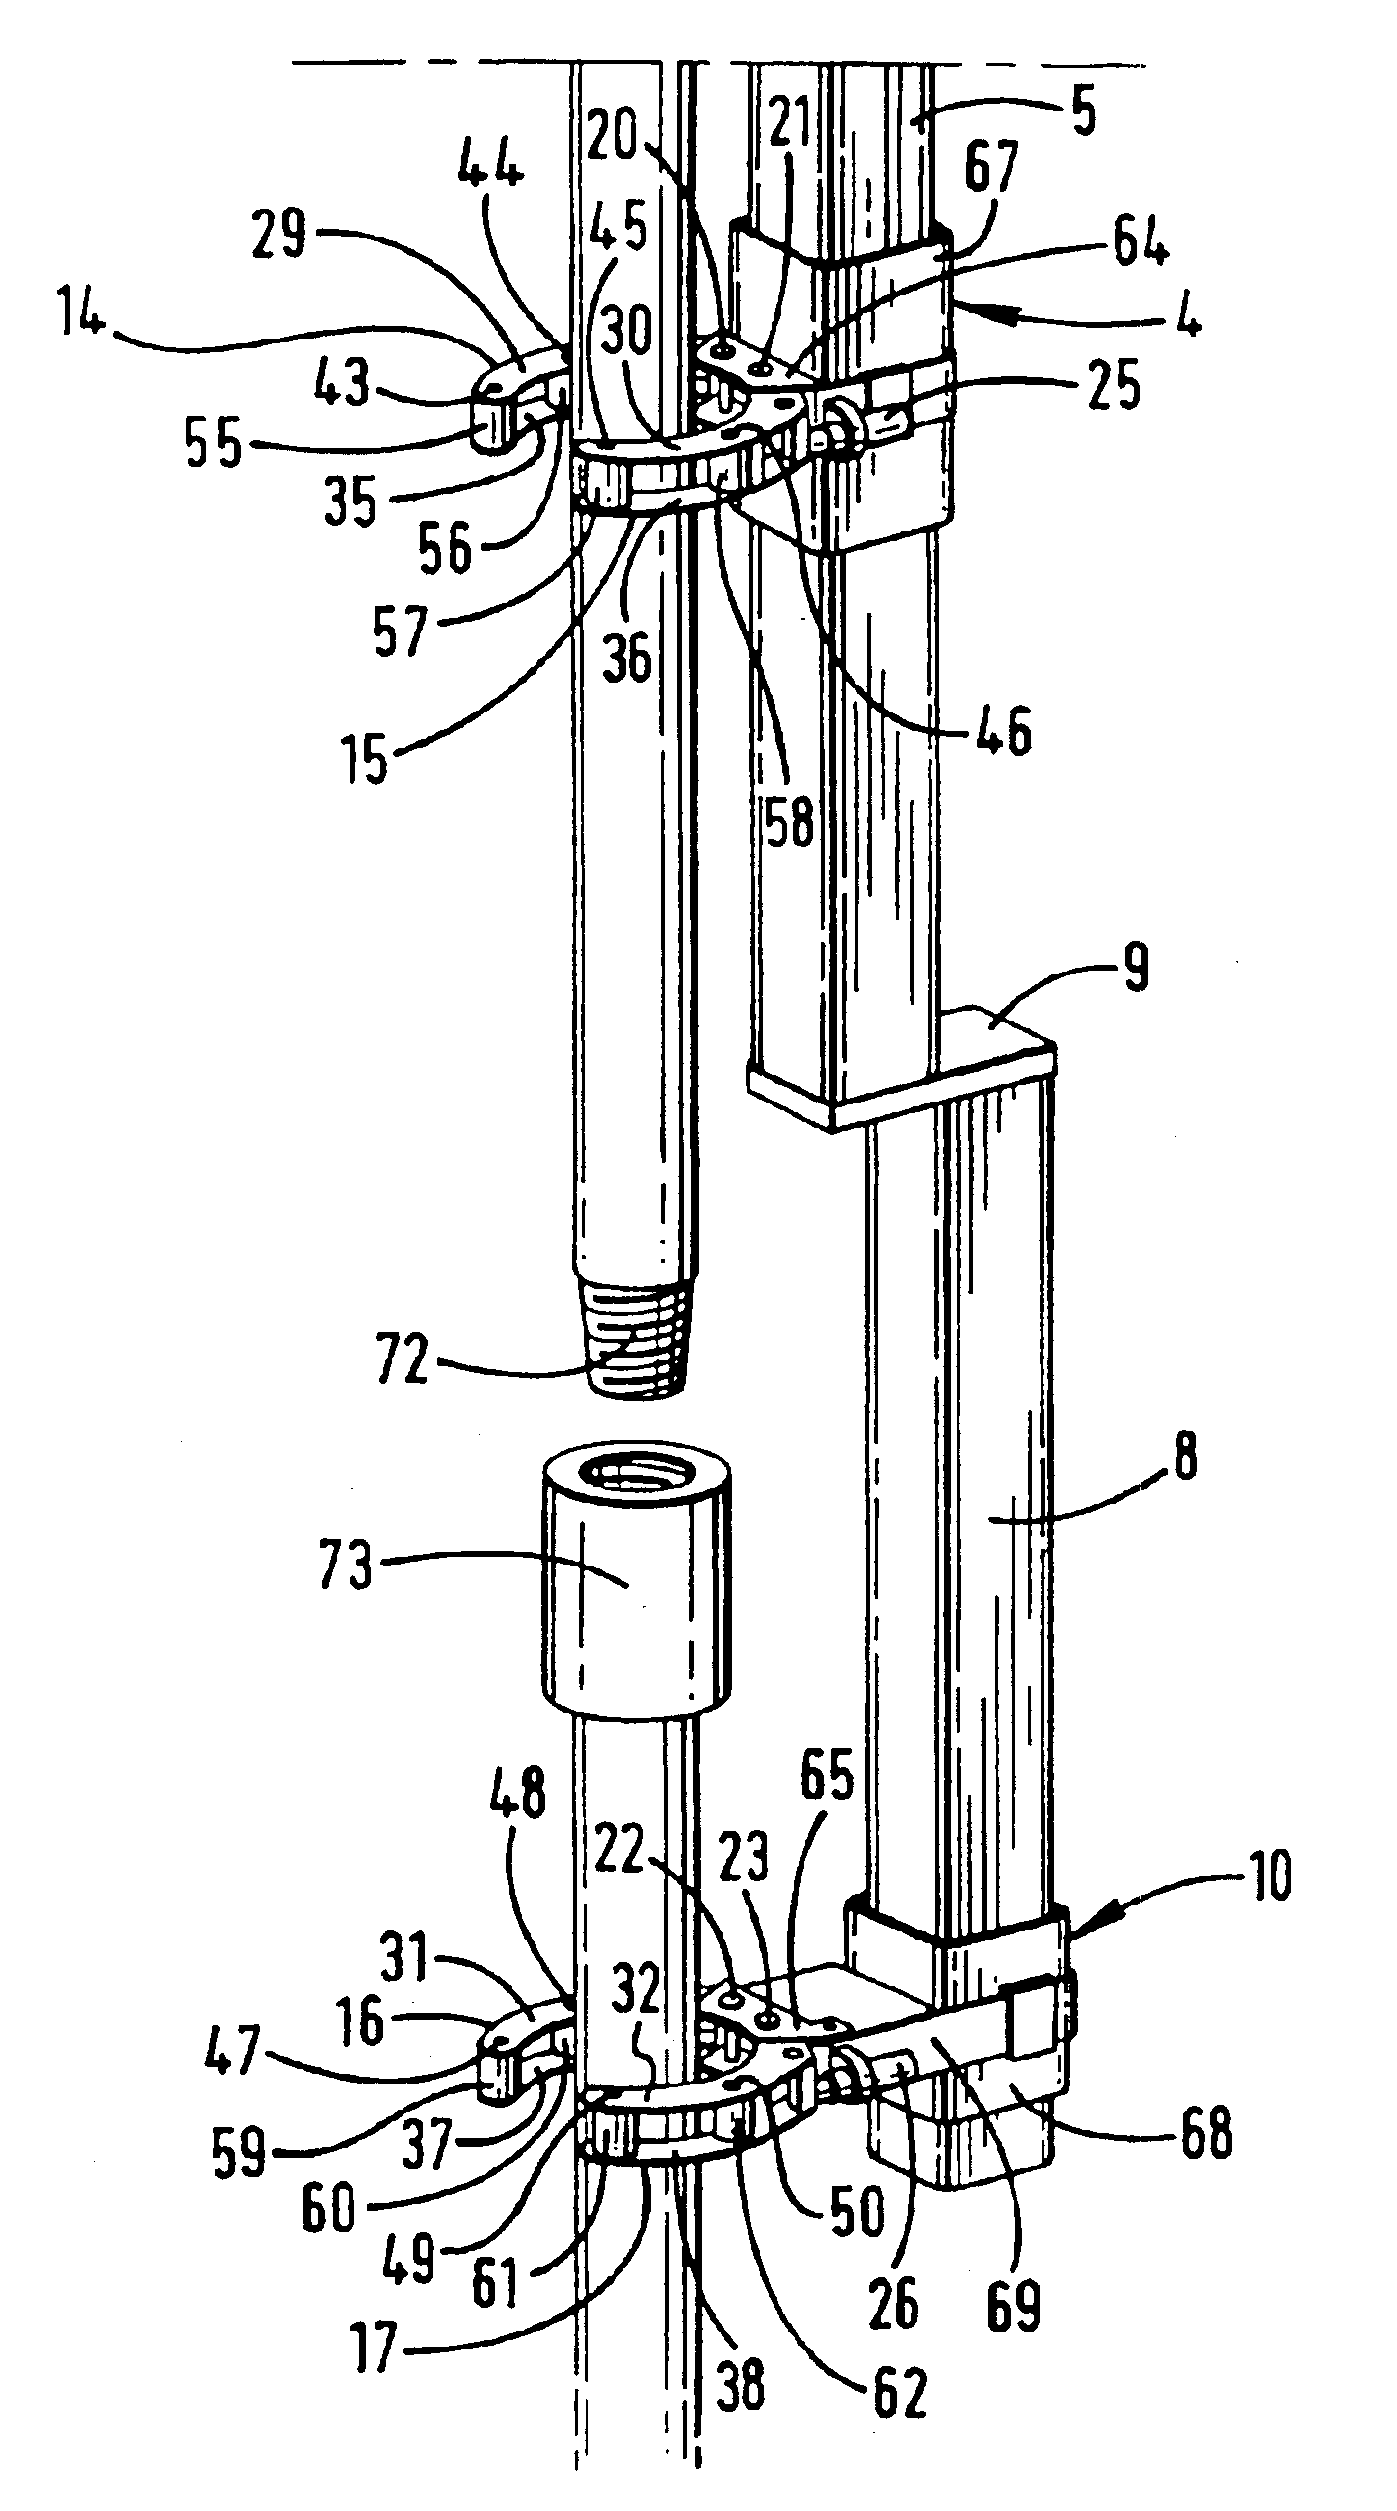 Apparatus and method for handling of tubulars